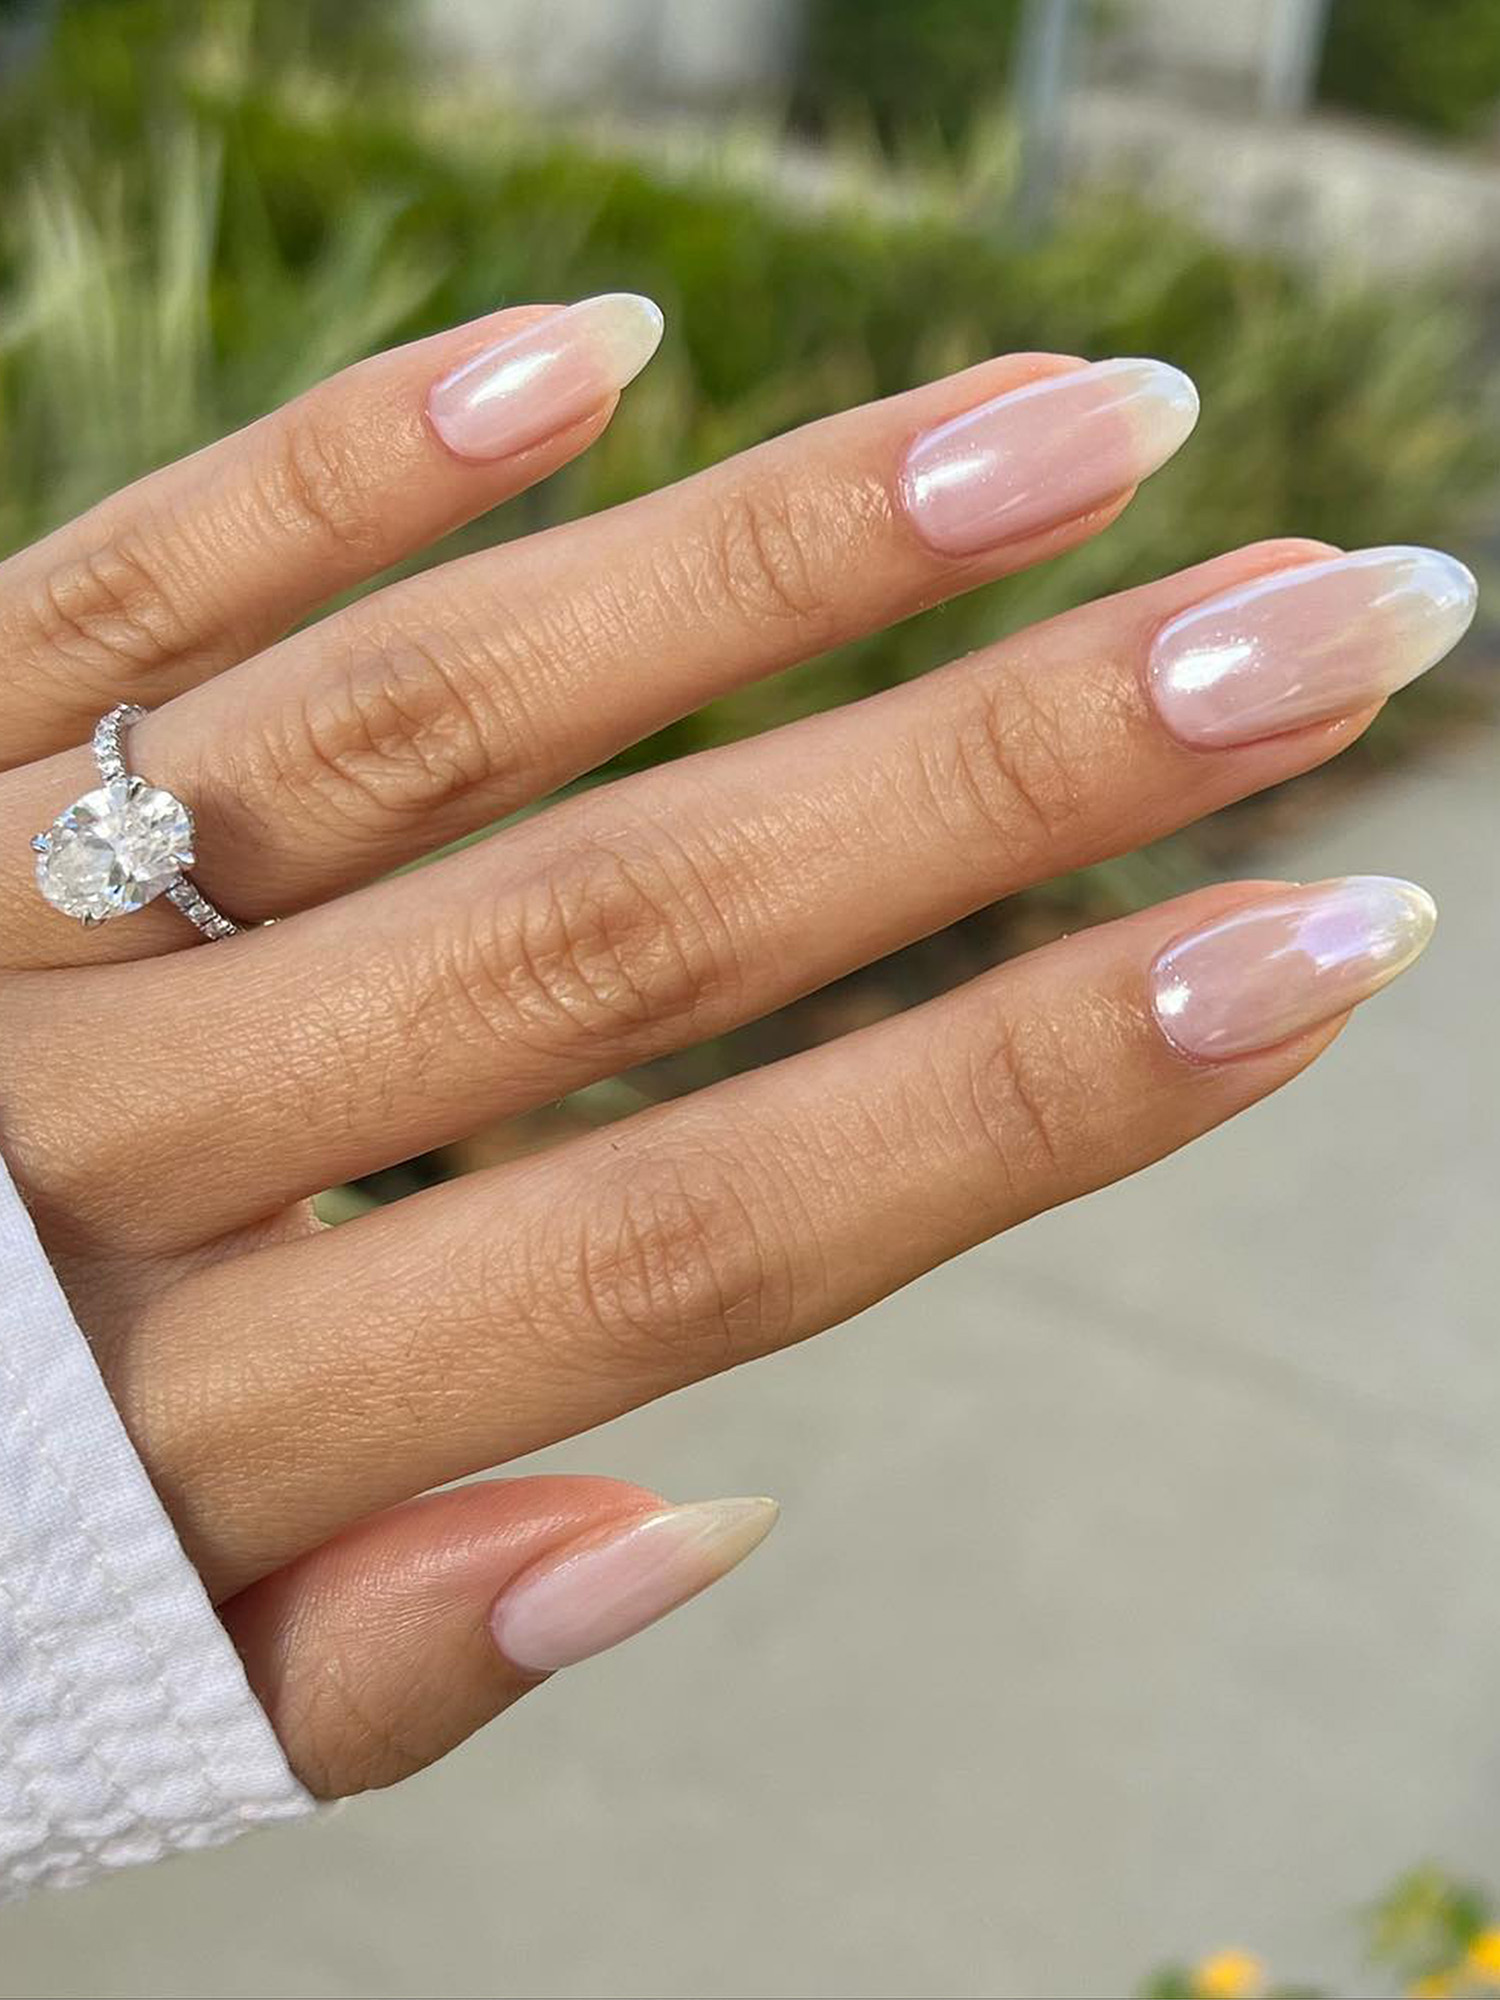 CLEAN GIRL AESTHETIC NAILS | Gallery posted by LifeWithLilli | Lemon8